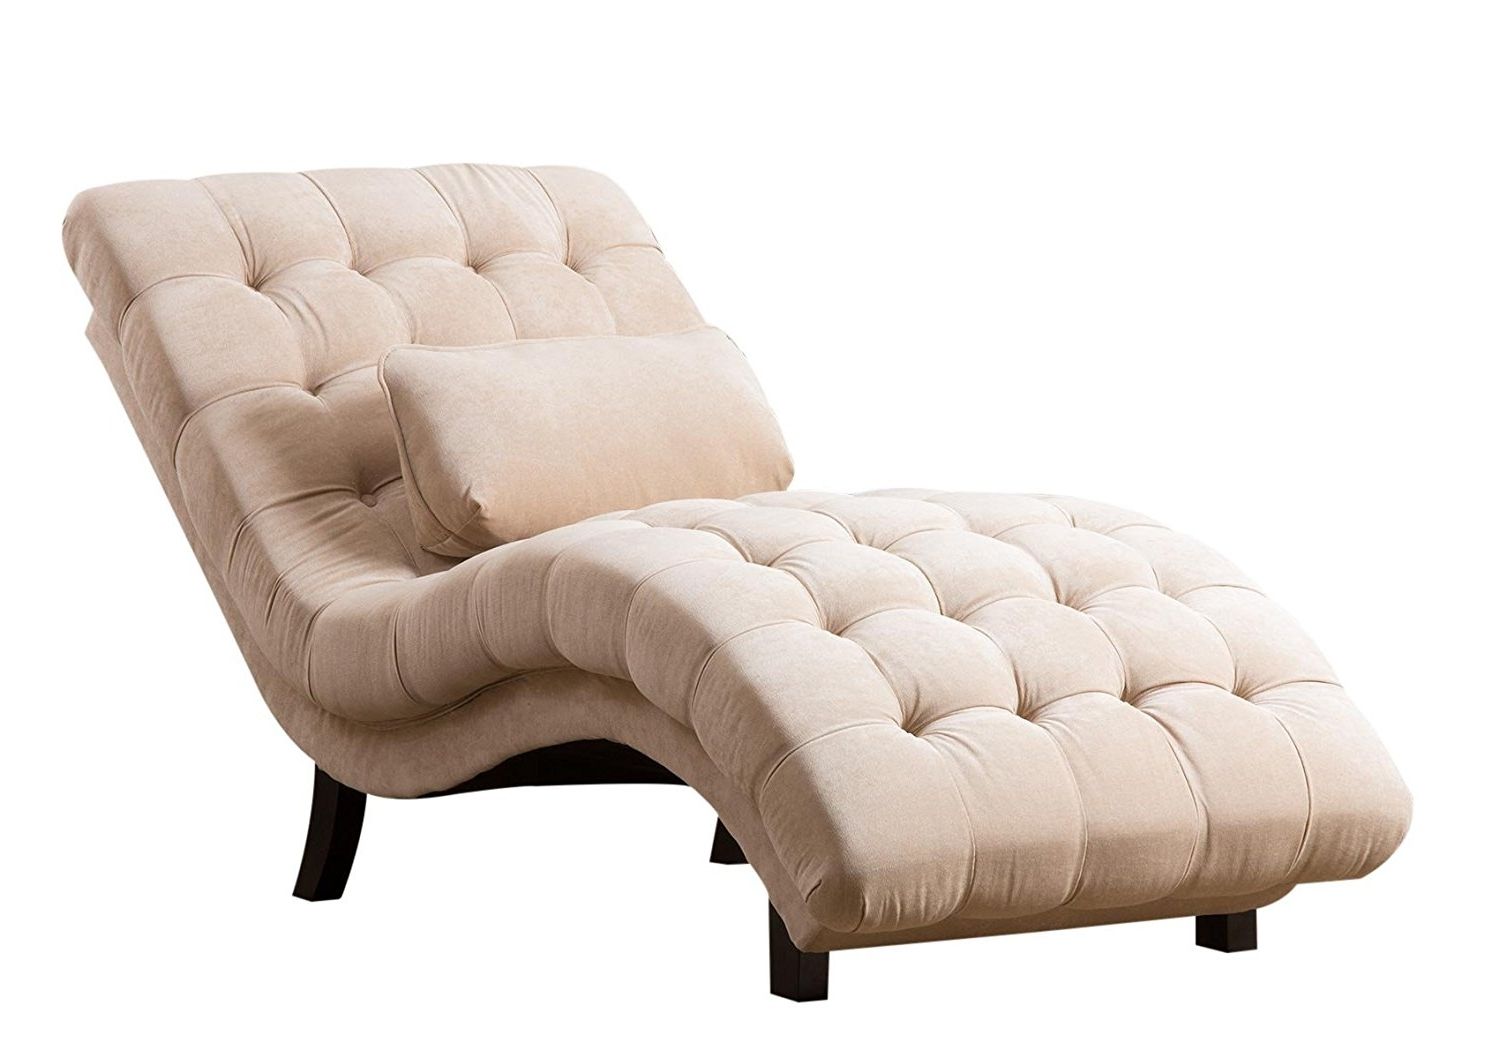 Upholstered Chaise Lounge Chairs With Regard To Most Popular Amazon: Abbyson Carmen Cream Fabric Chaise: Home & Kitchen (View 6 of 15)